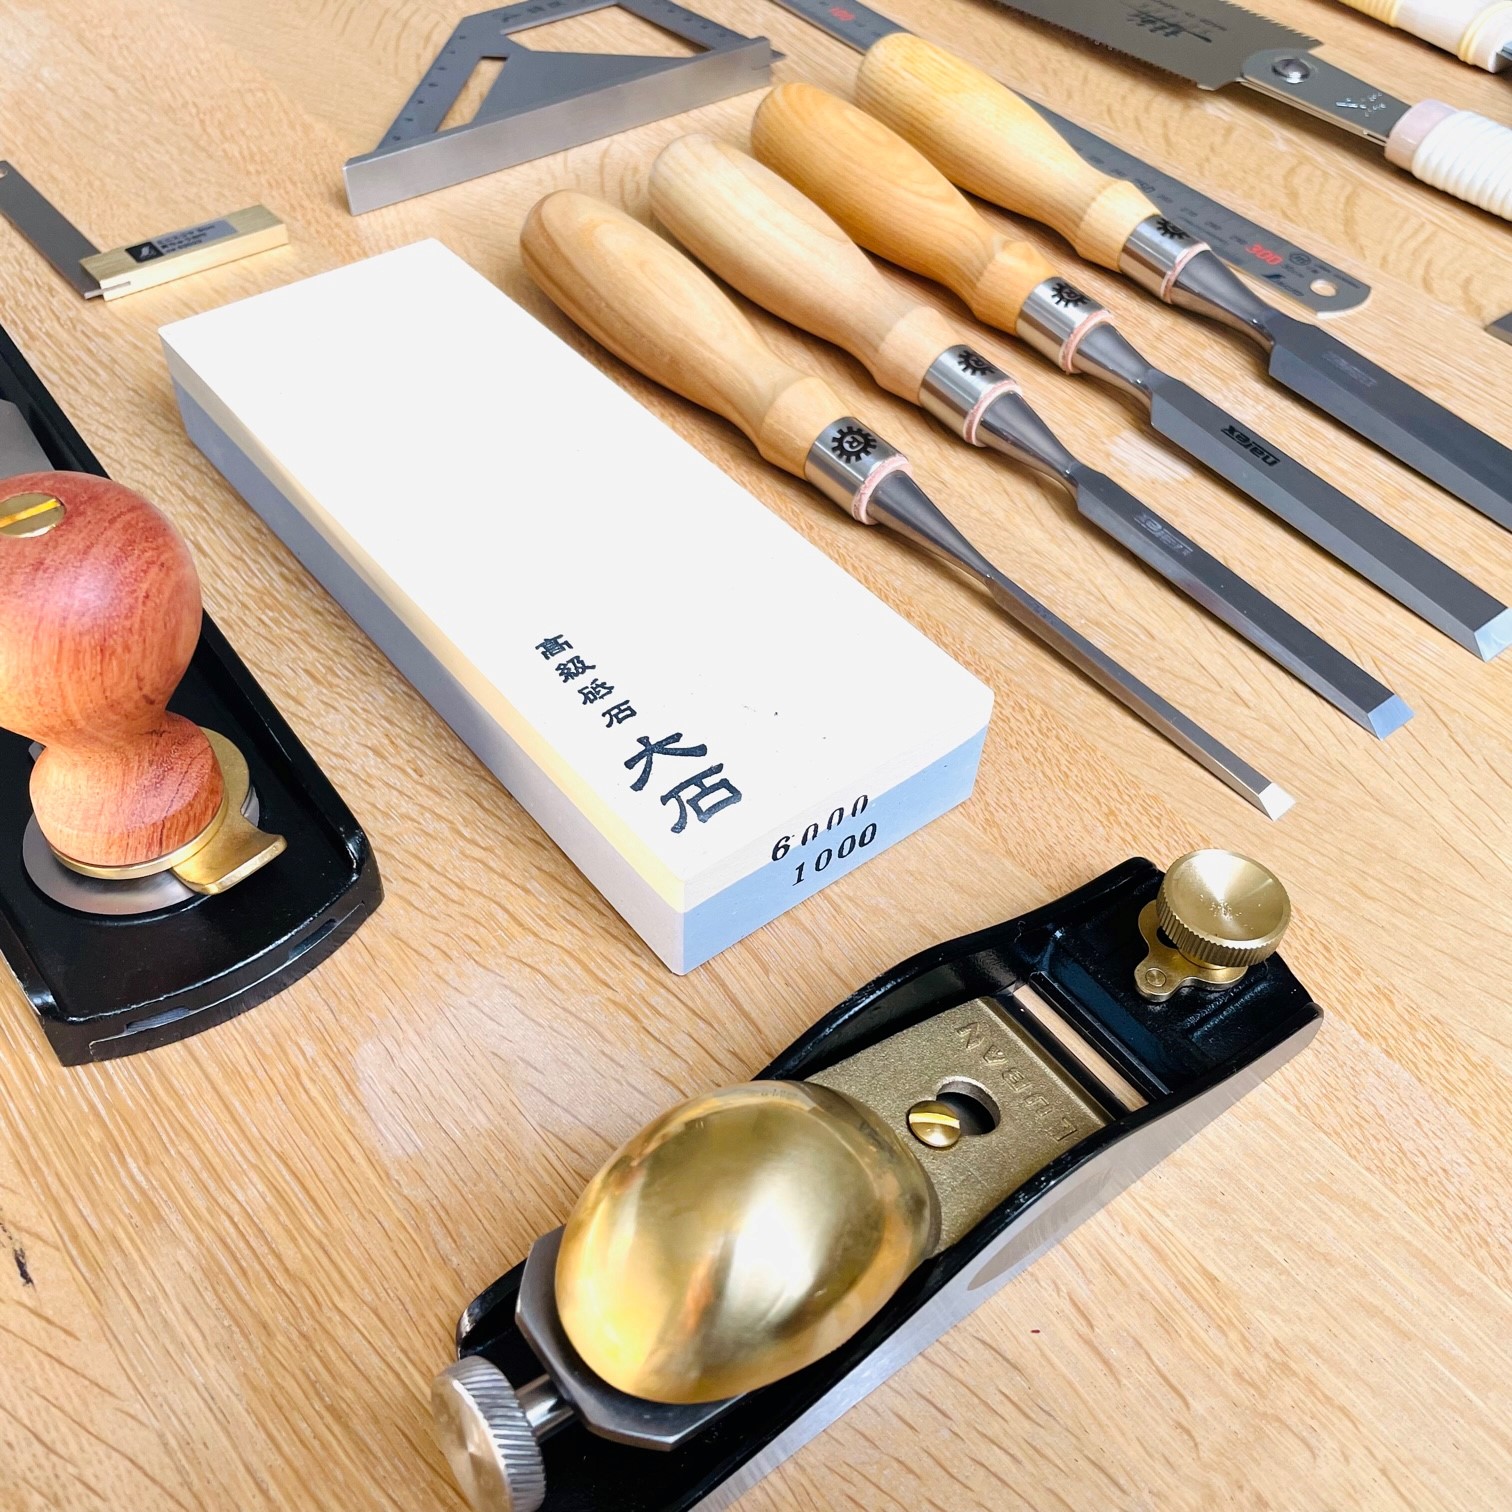 Silver Woodworking Tool Set For Beginners • The Woodworking Club